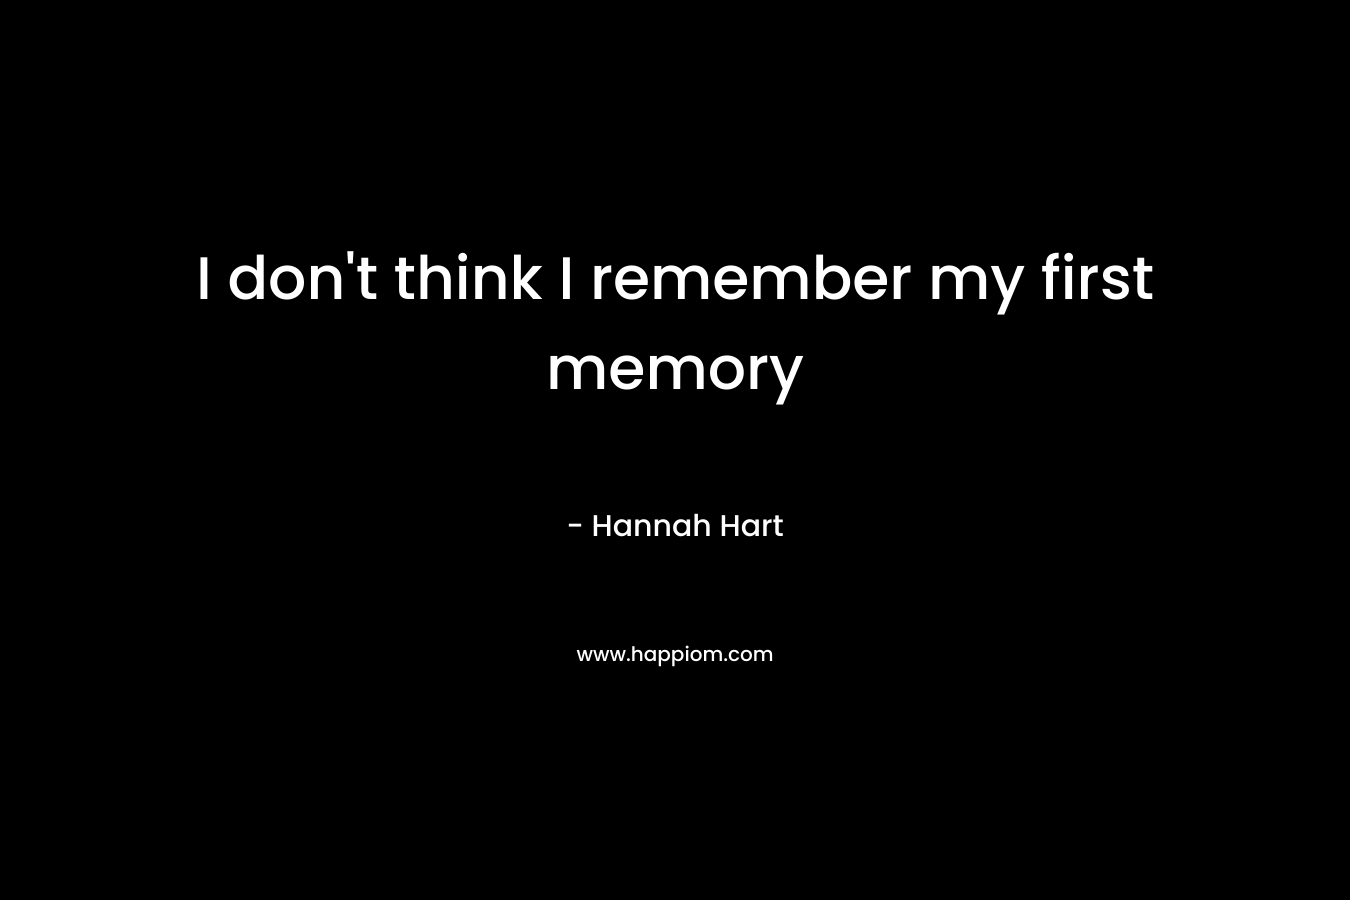 I don't think I remember my first memory